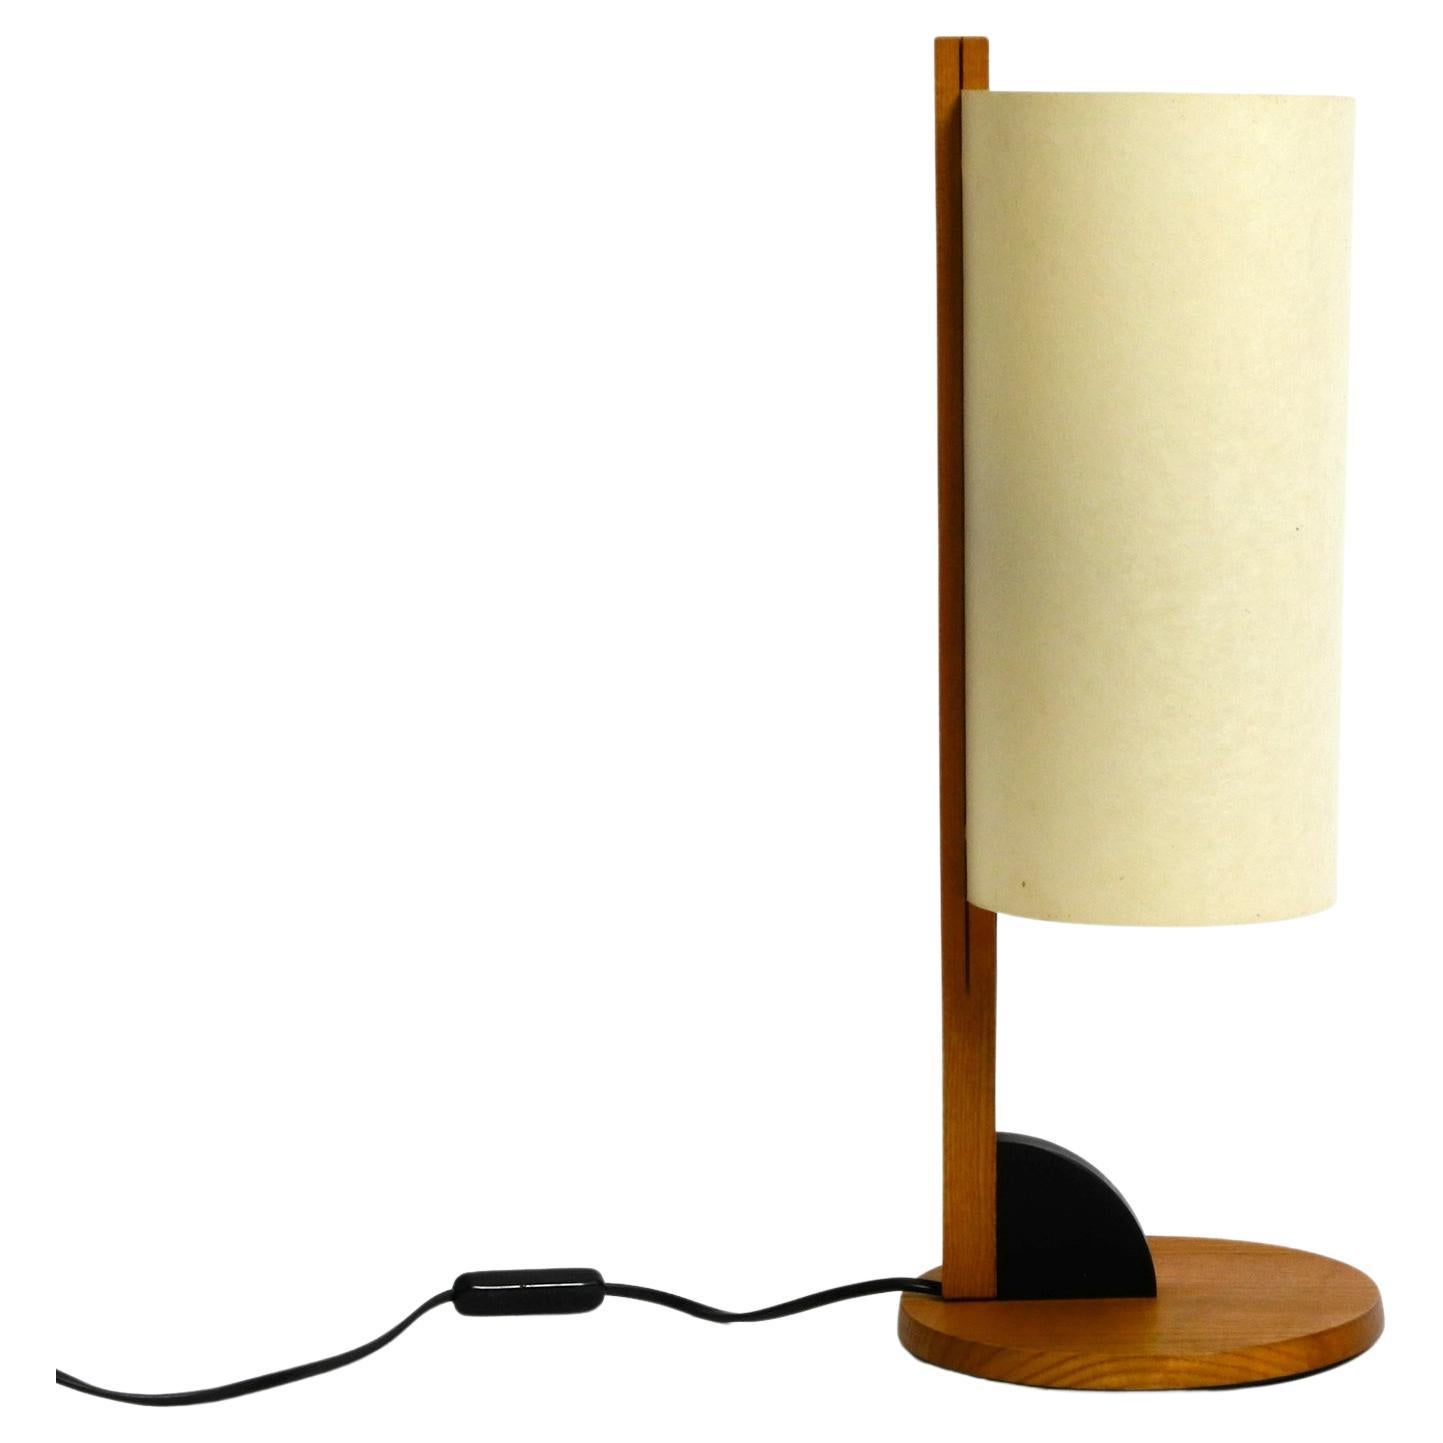 Beautiful Large Minimalist Teak Table Lamp with Lunopal Shade by Domus 80s